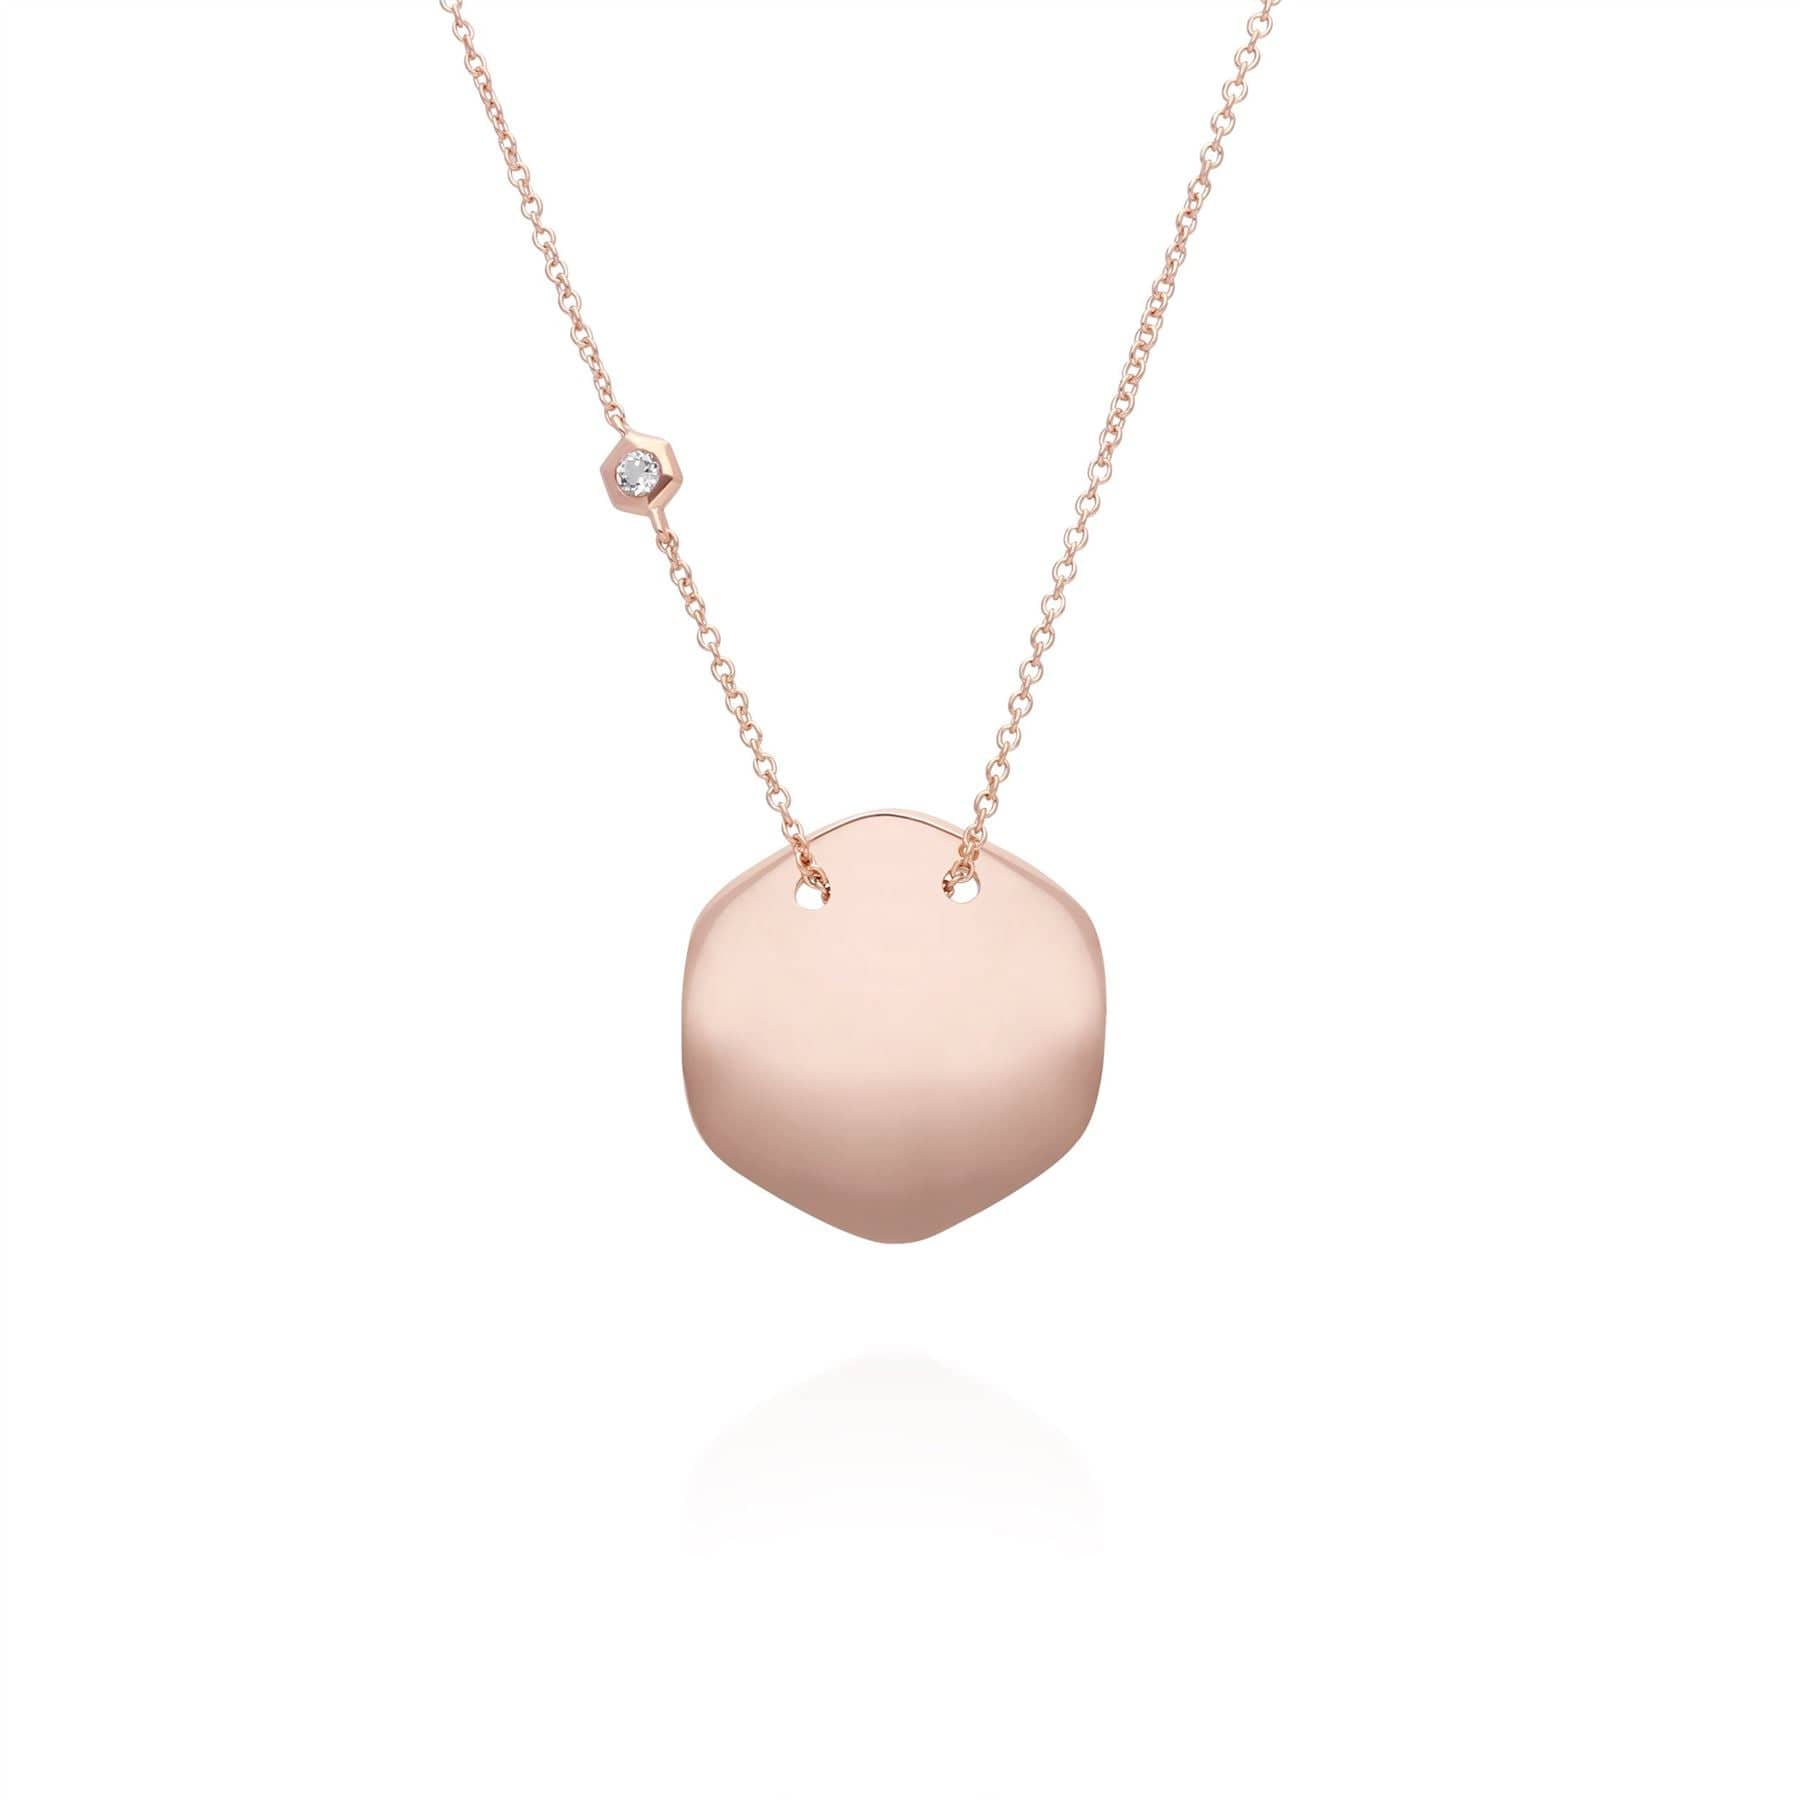 White Topaz Engravable Necklace in Rose Gold Plated Sterling Silver - Gemondo